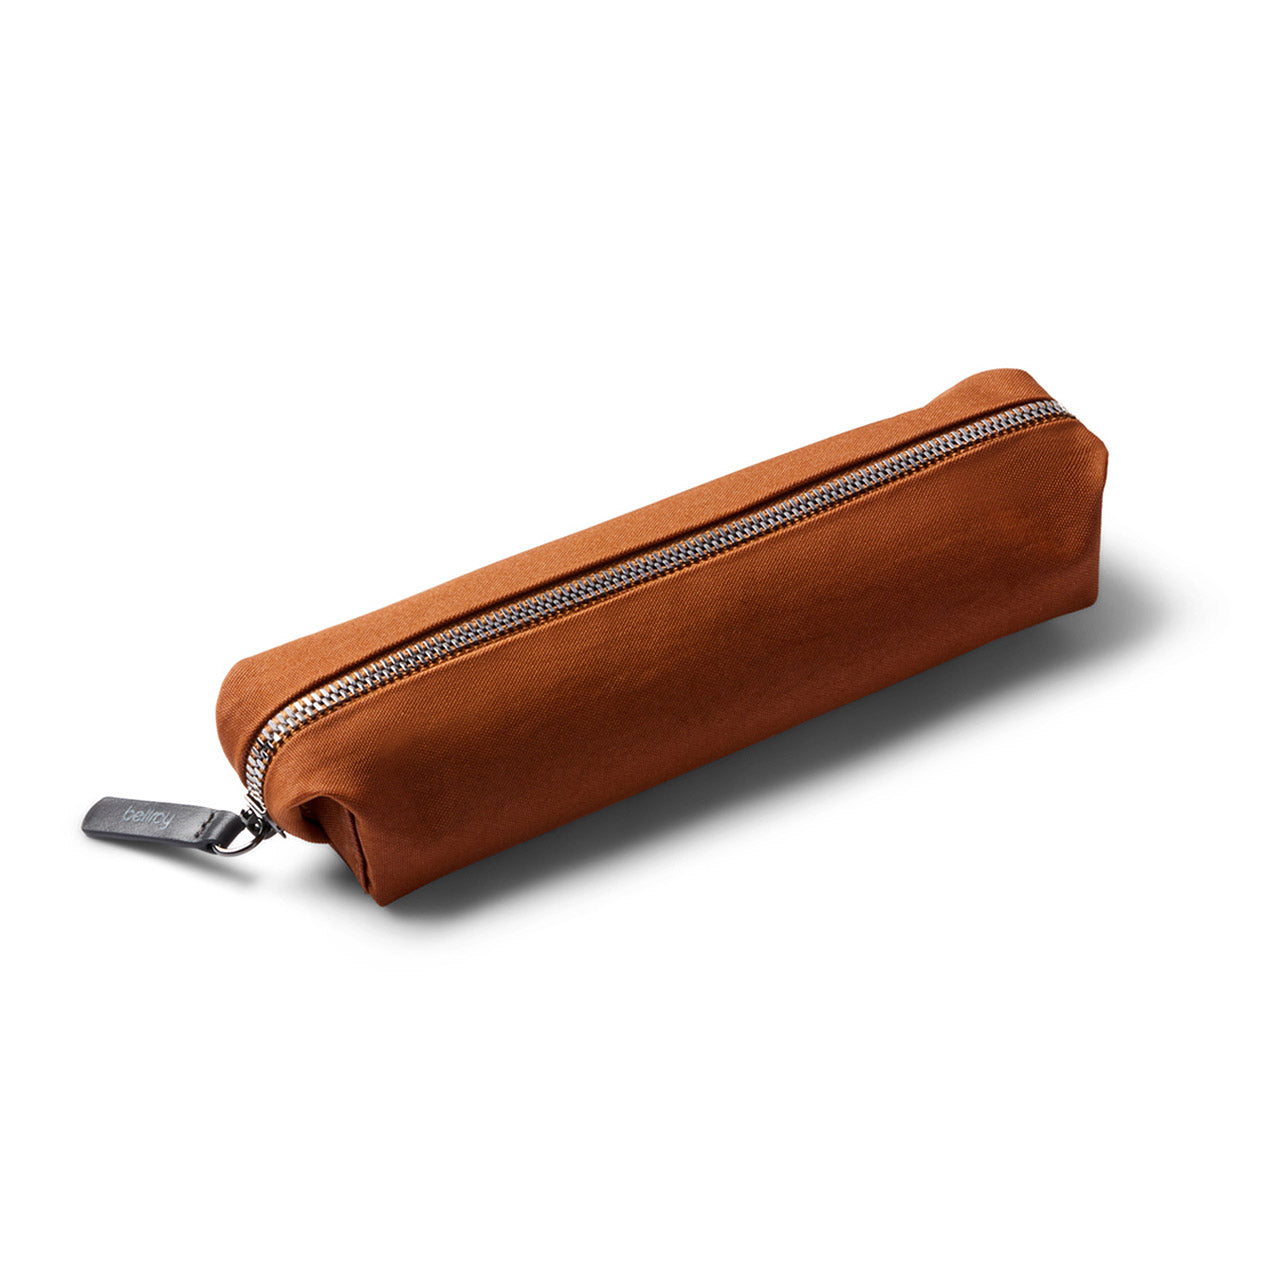 Bellroy Pencil Case - A Stylish Case for Your Writing Instruments –  Milligram